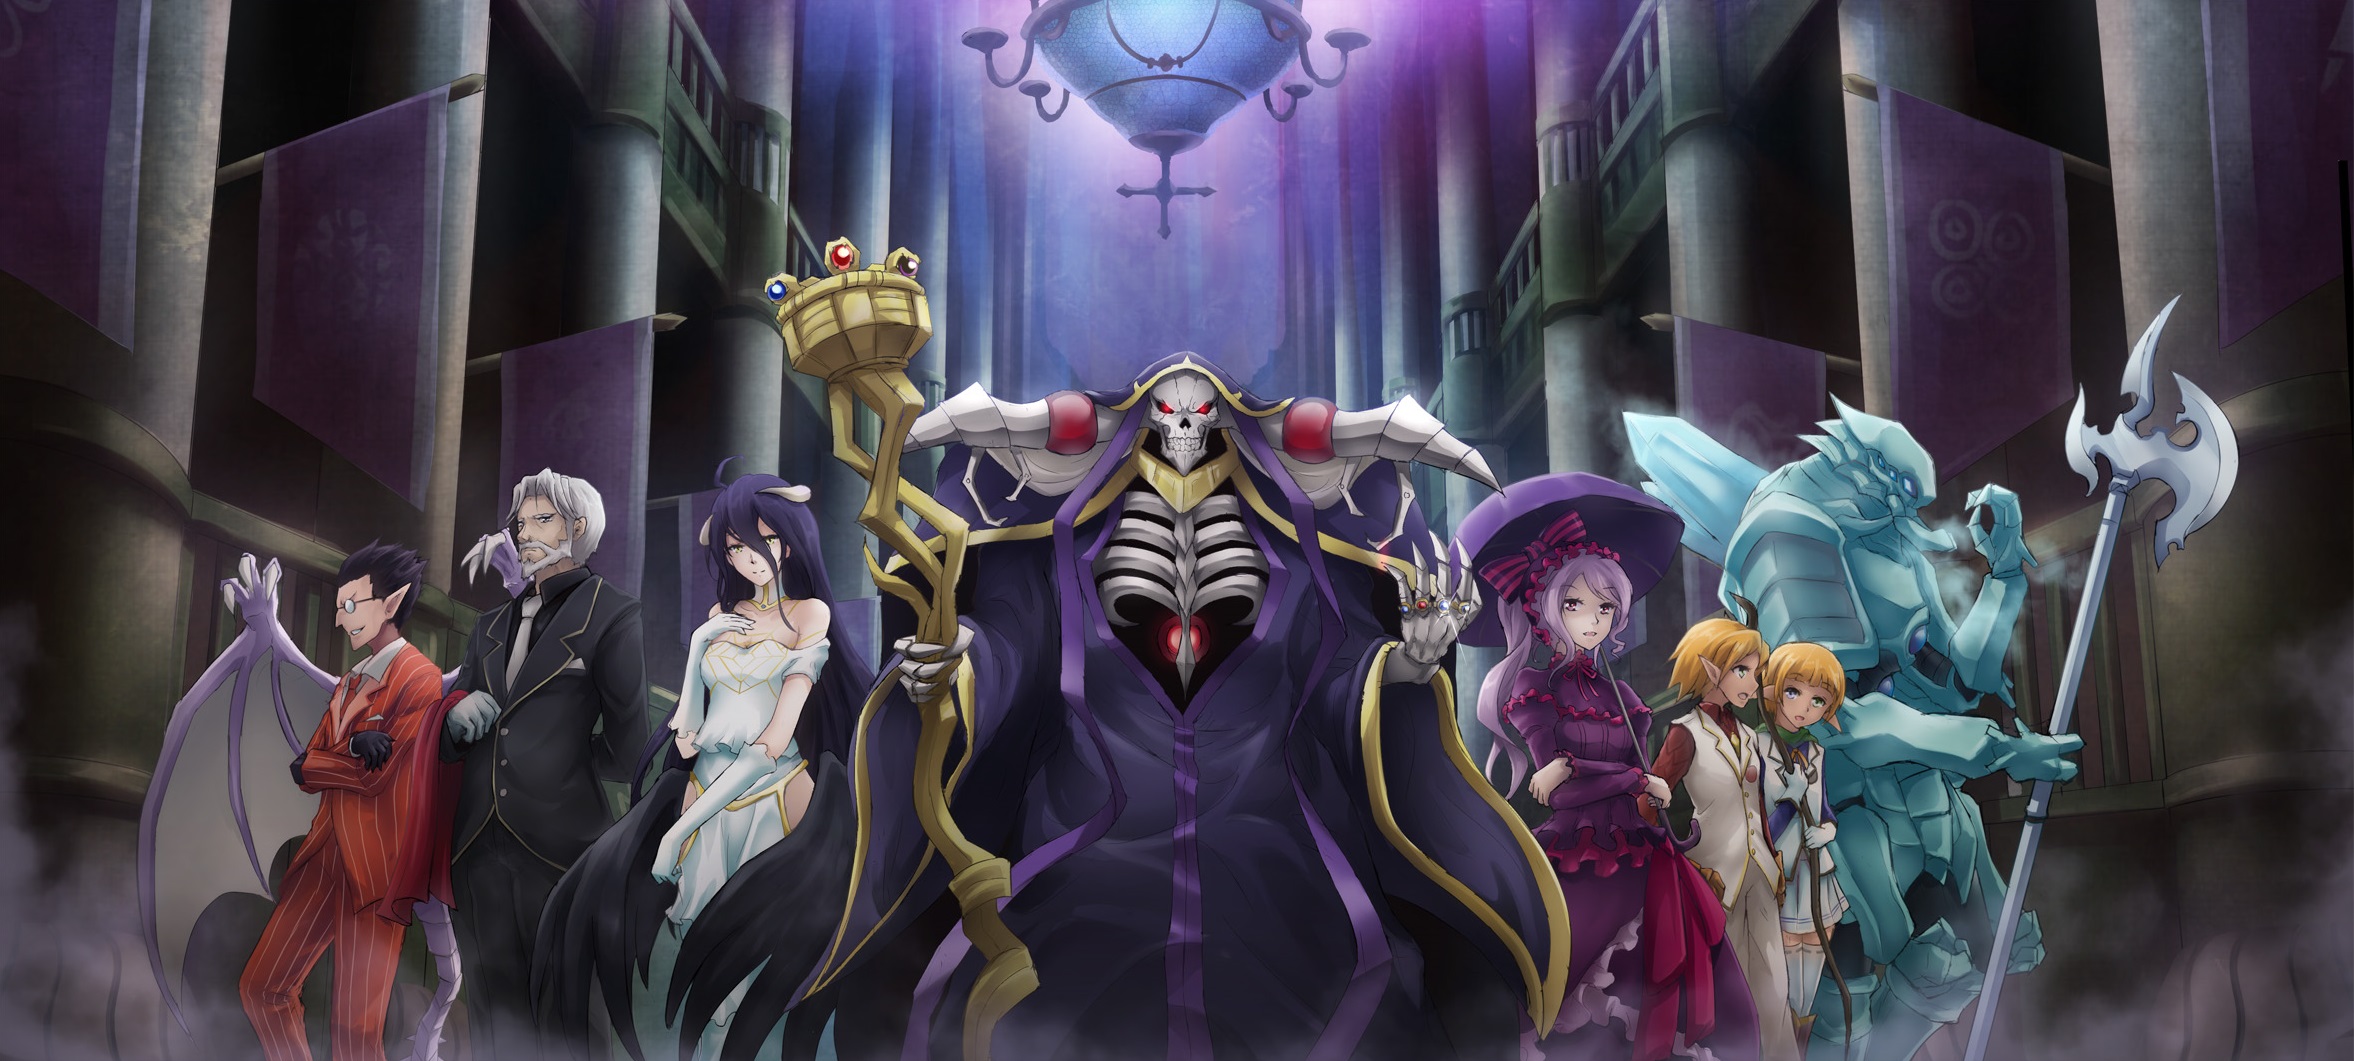 Ainz Ooal Gown Albedo Overlord Aura Bella Fiora Cocytus Overlord Demiurge Overlord Great Tomb Of